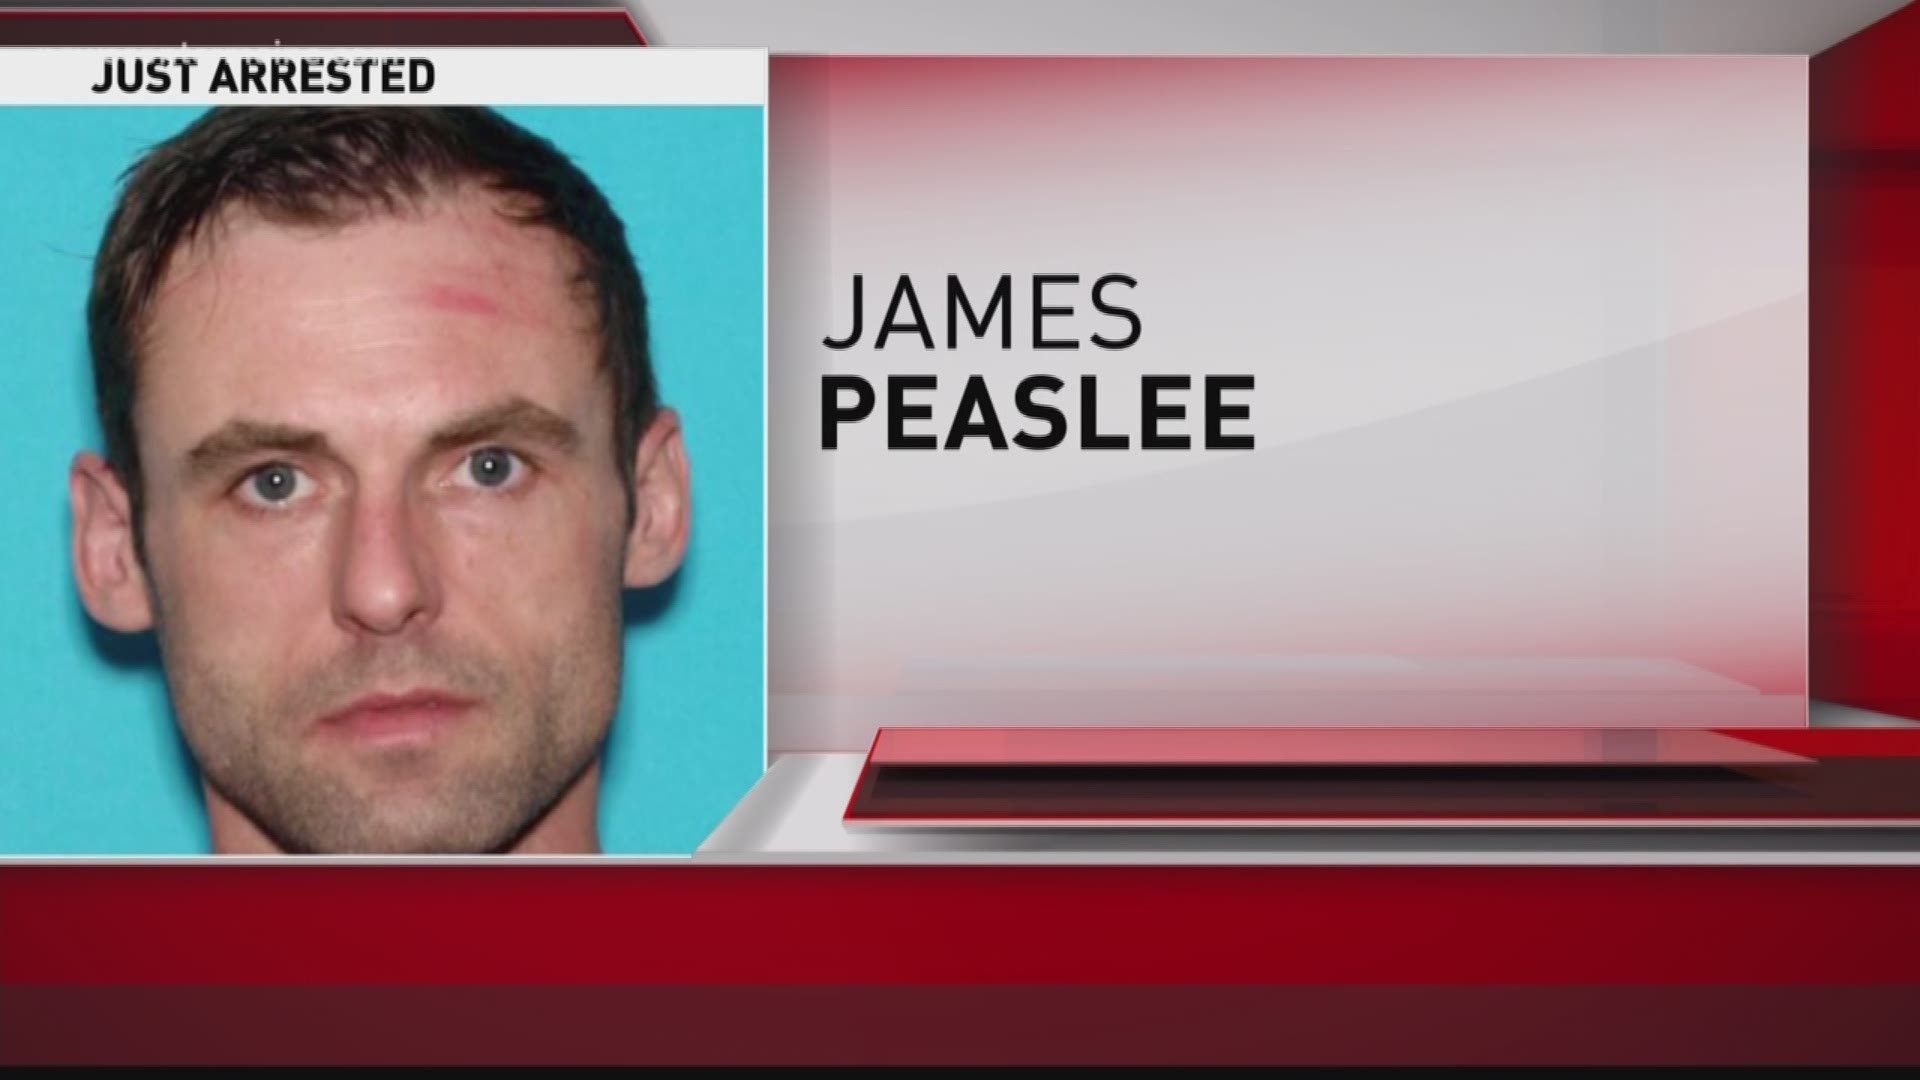 James Peaslee was arrested for the murder of a 79-year-old Bridgewater man